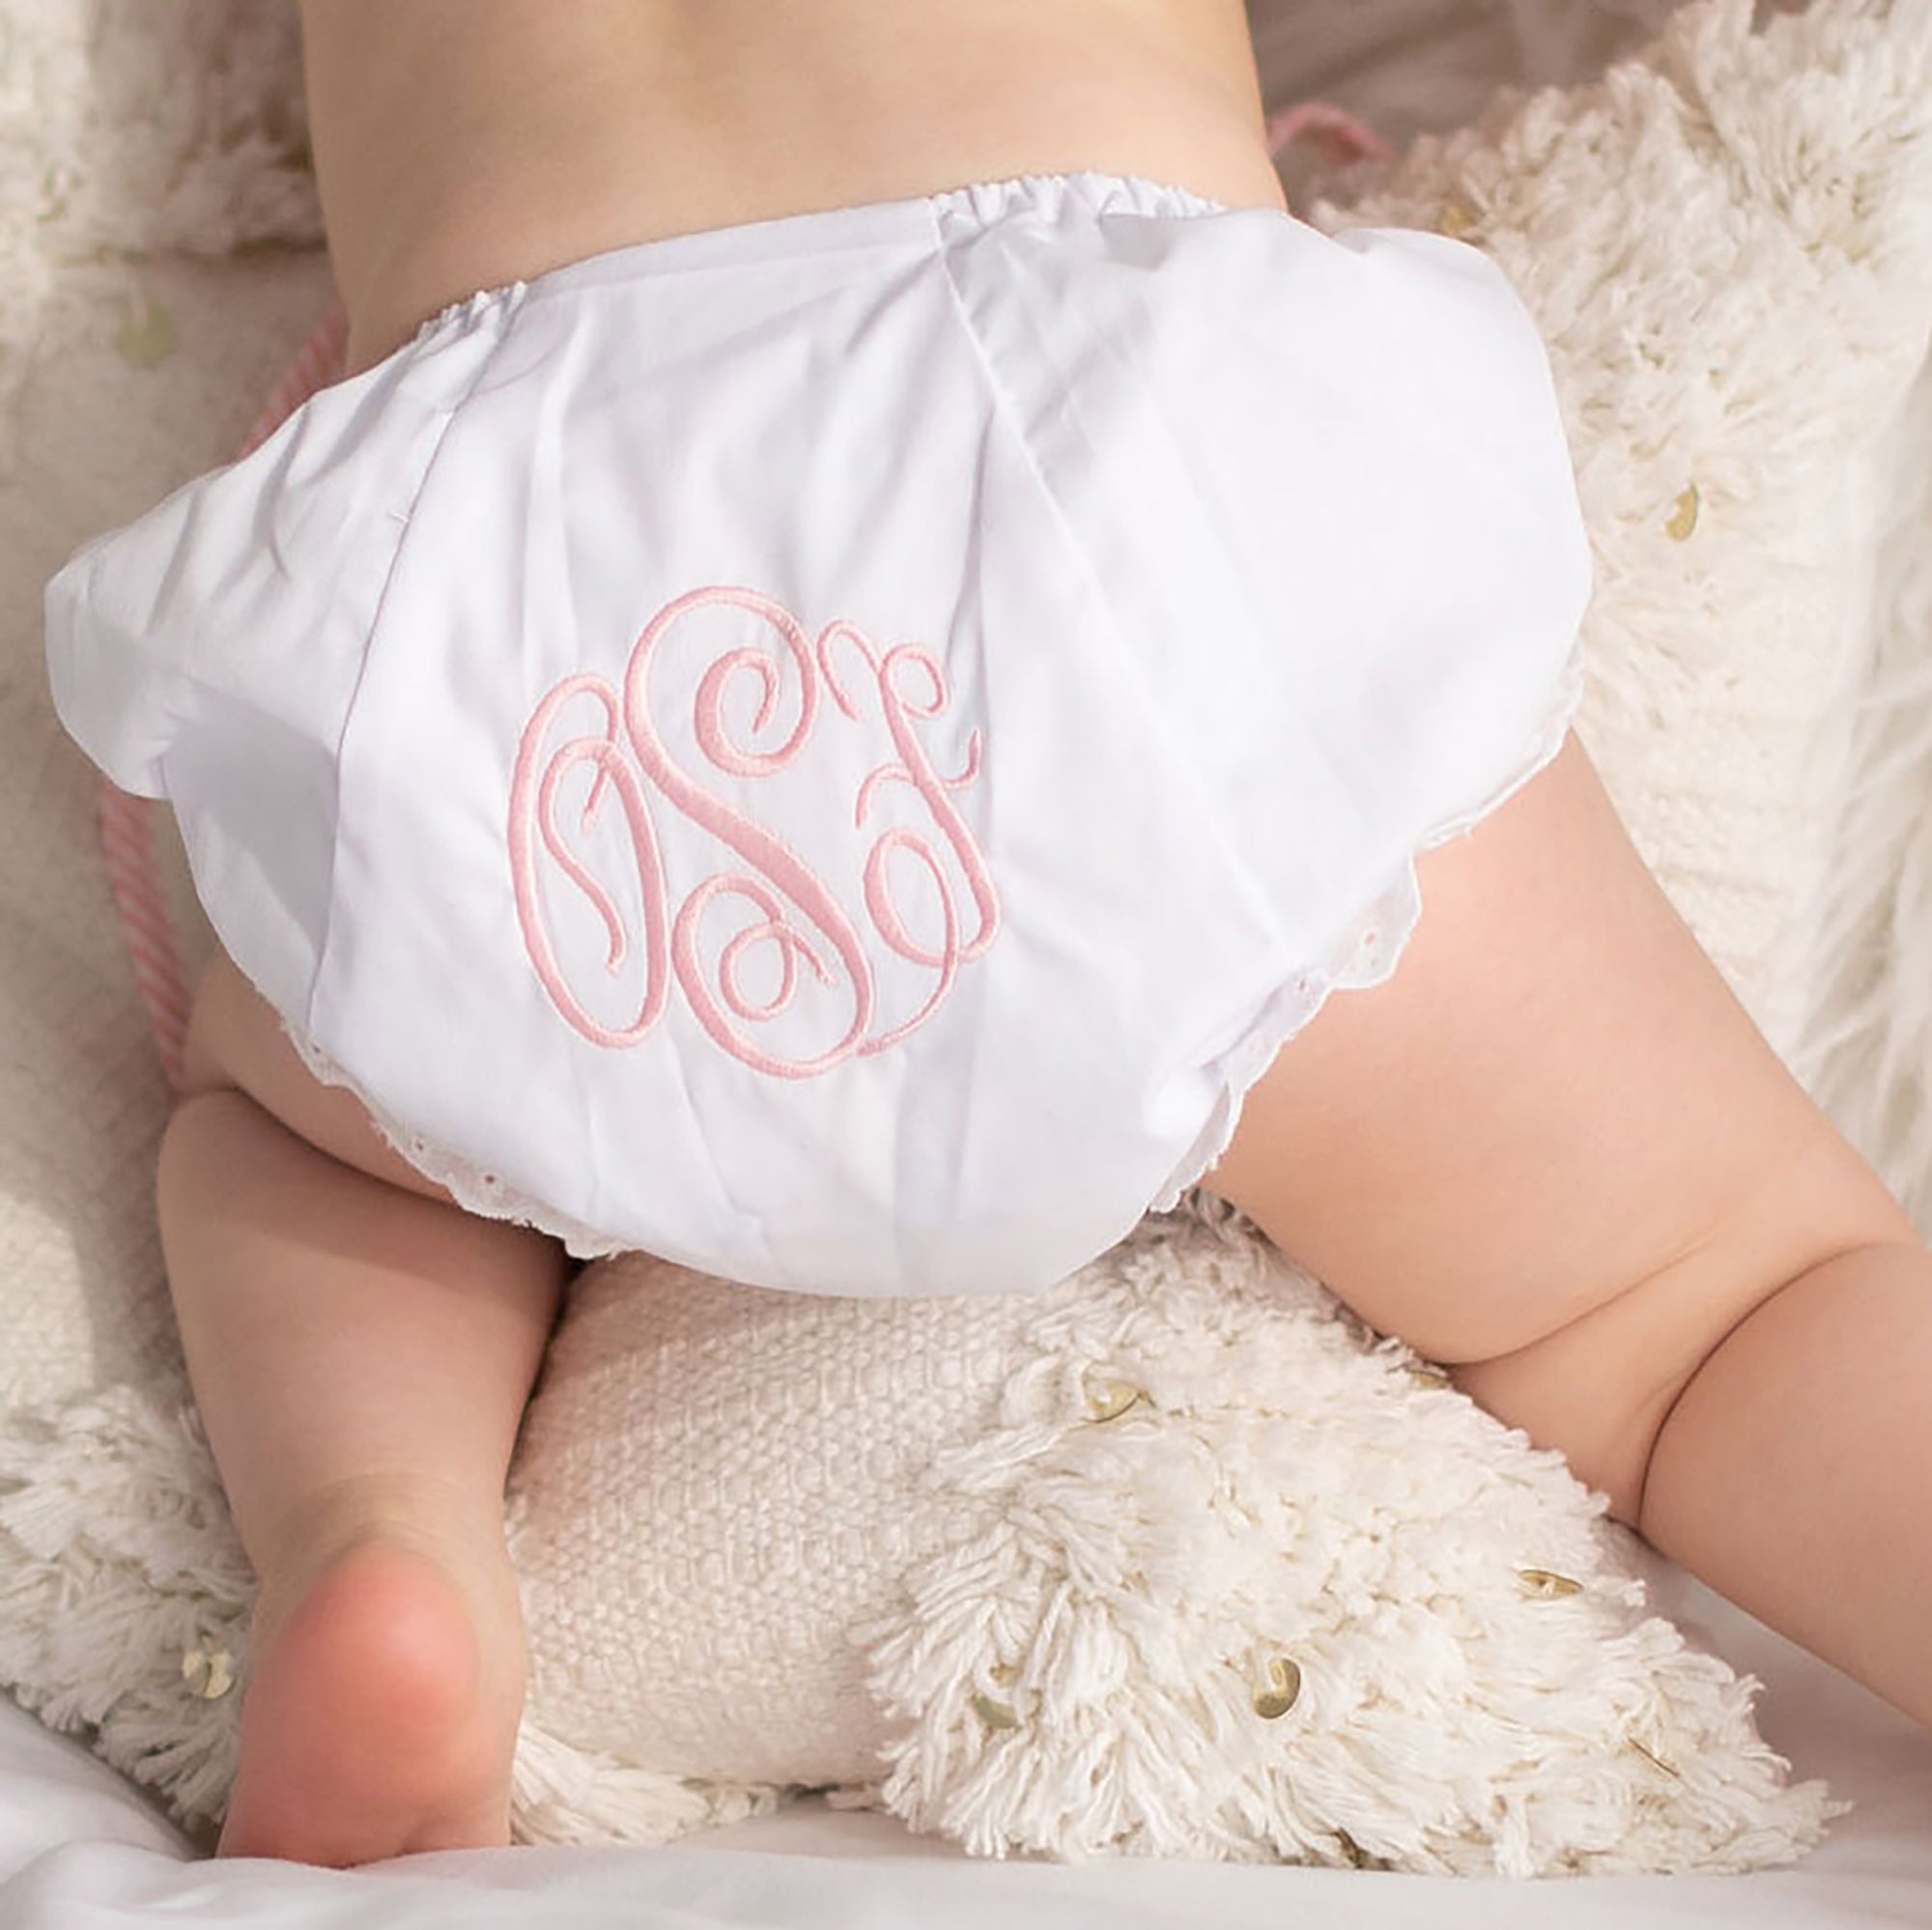 Baby Girl Pink Monogrammed Bloomers, Diaper Cover – BlessedChaosCreations